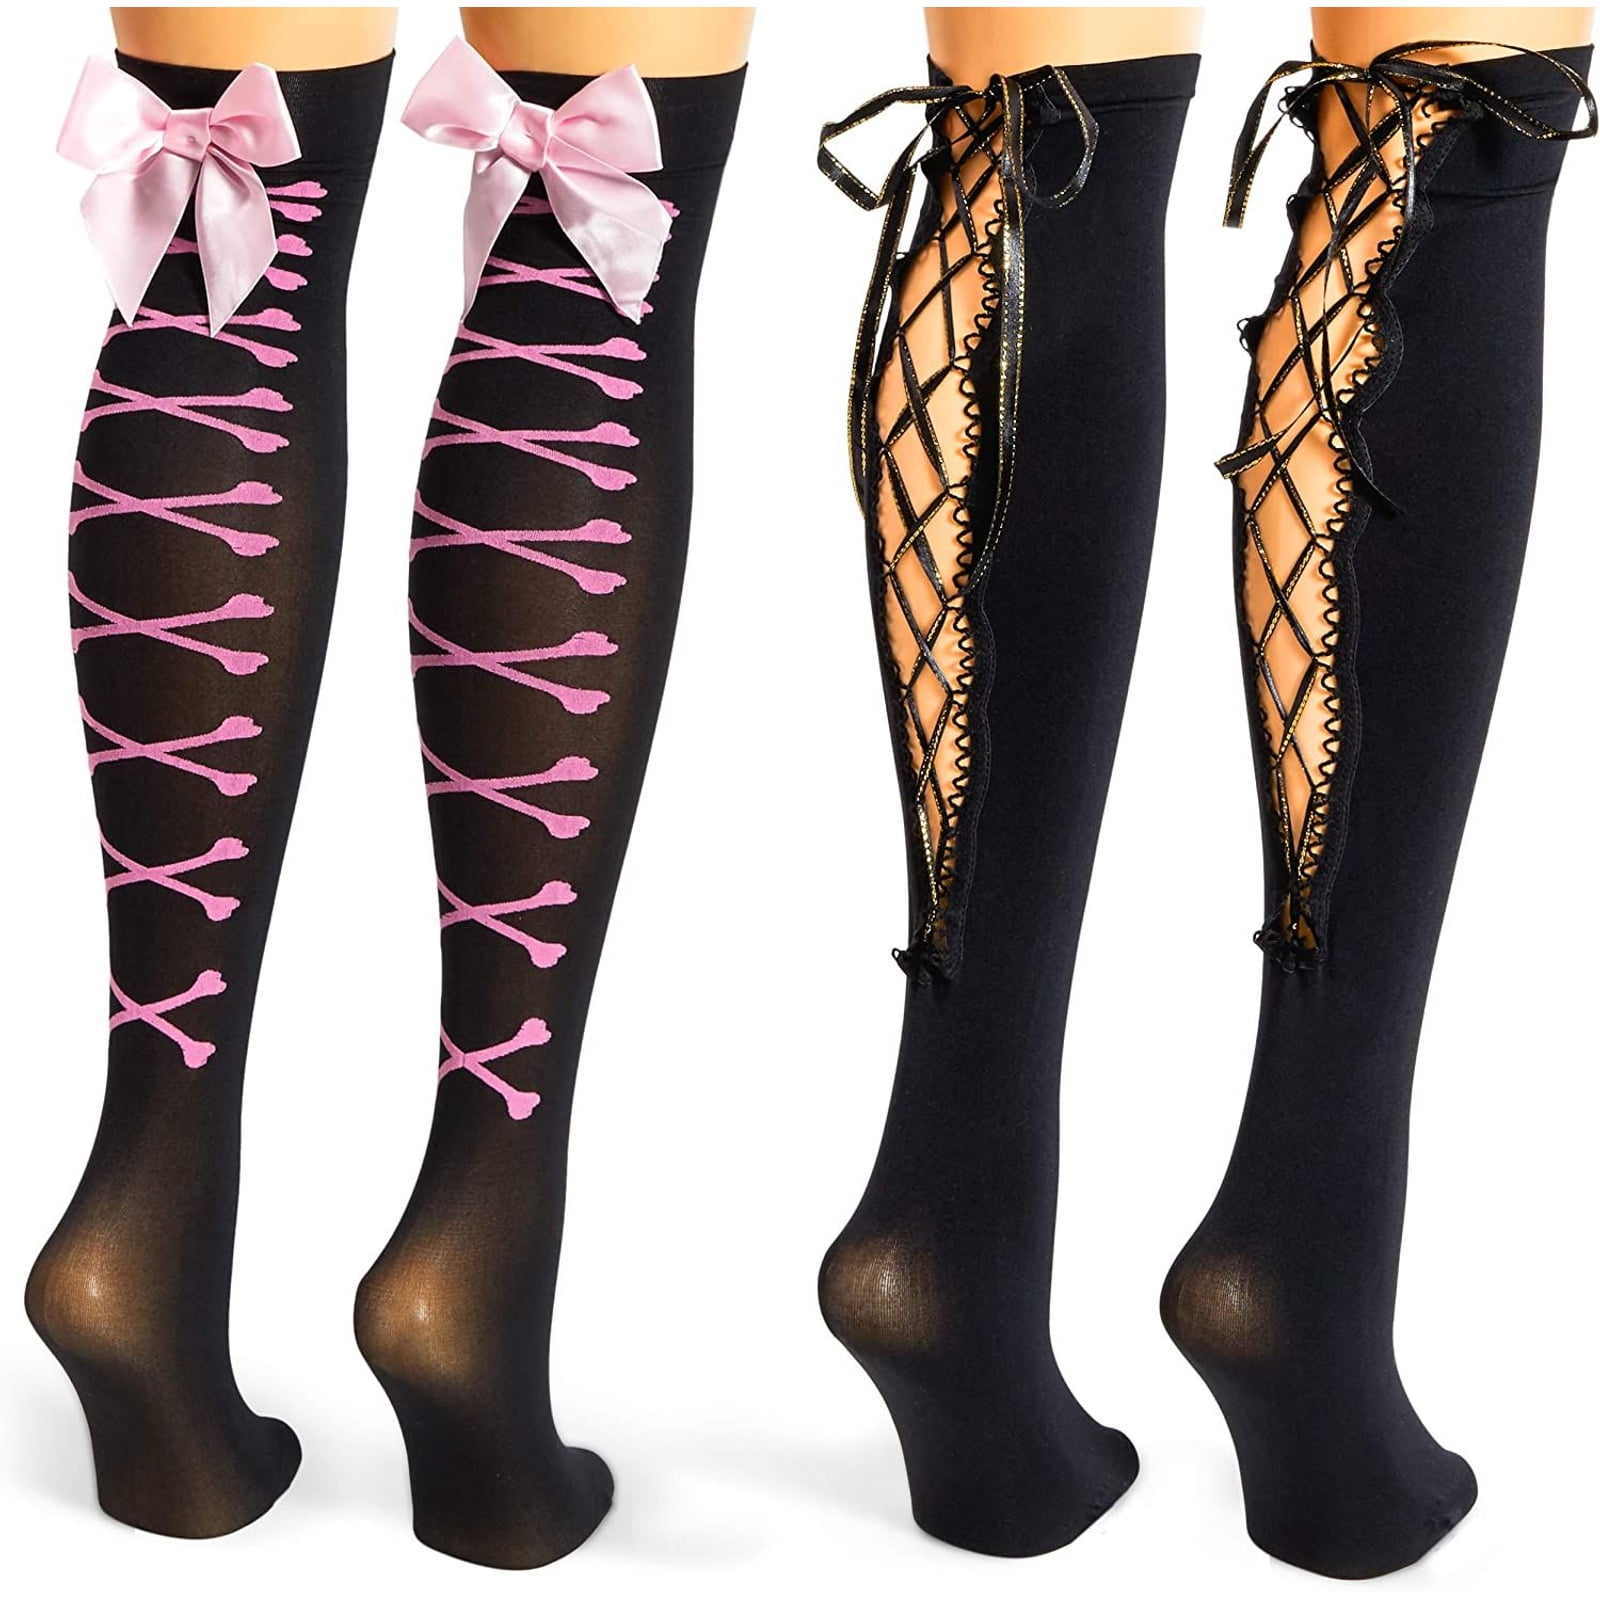 Cute Girl Bowknot Lace-up Stockings Hold-ups Lady Over the Knee Socks Thigh High